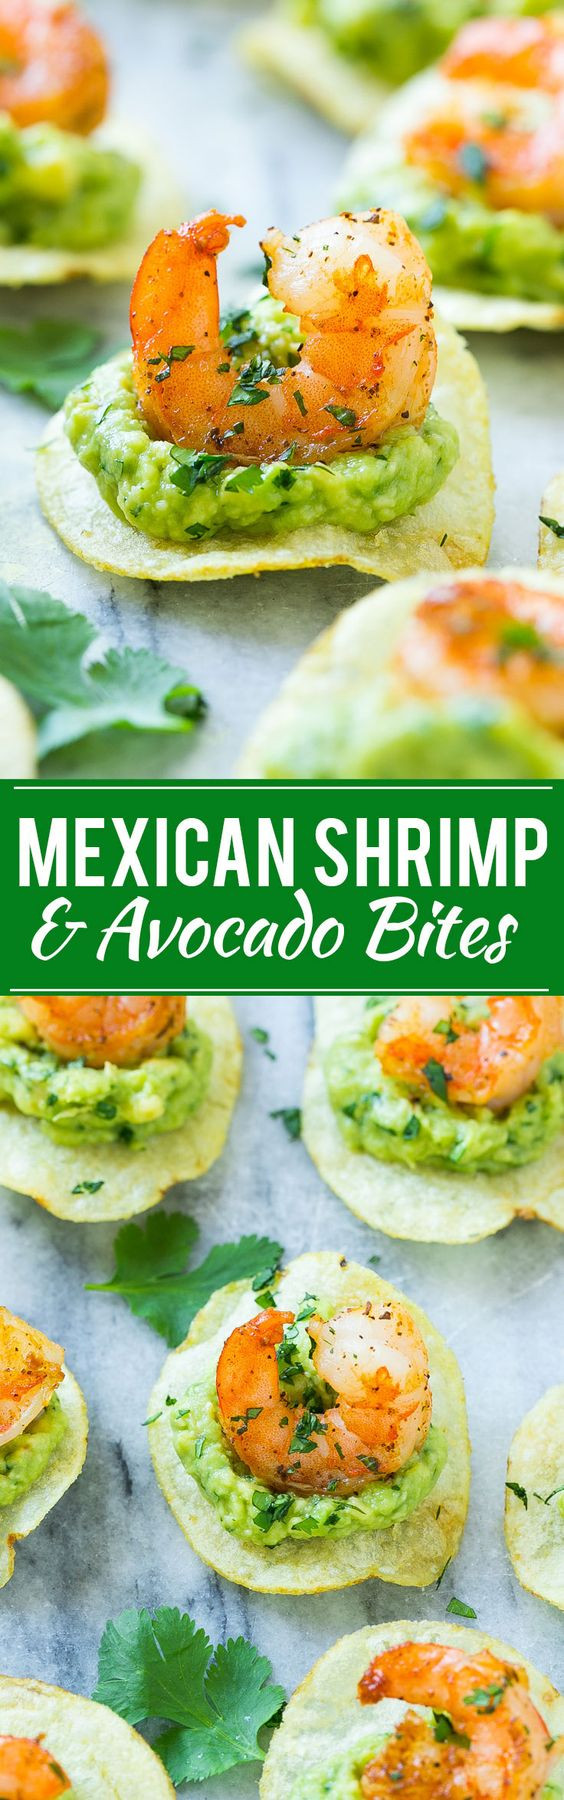 Mexican Appetizers For Parties
 The Best Easy Party Appetizers Hors D’oeuvres Delicious